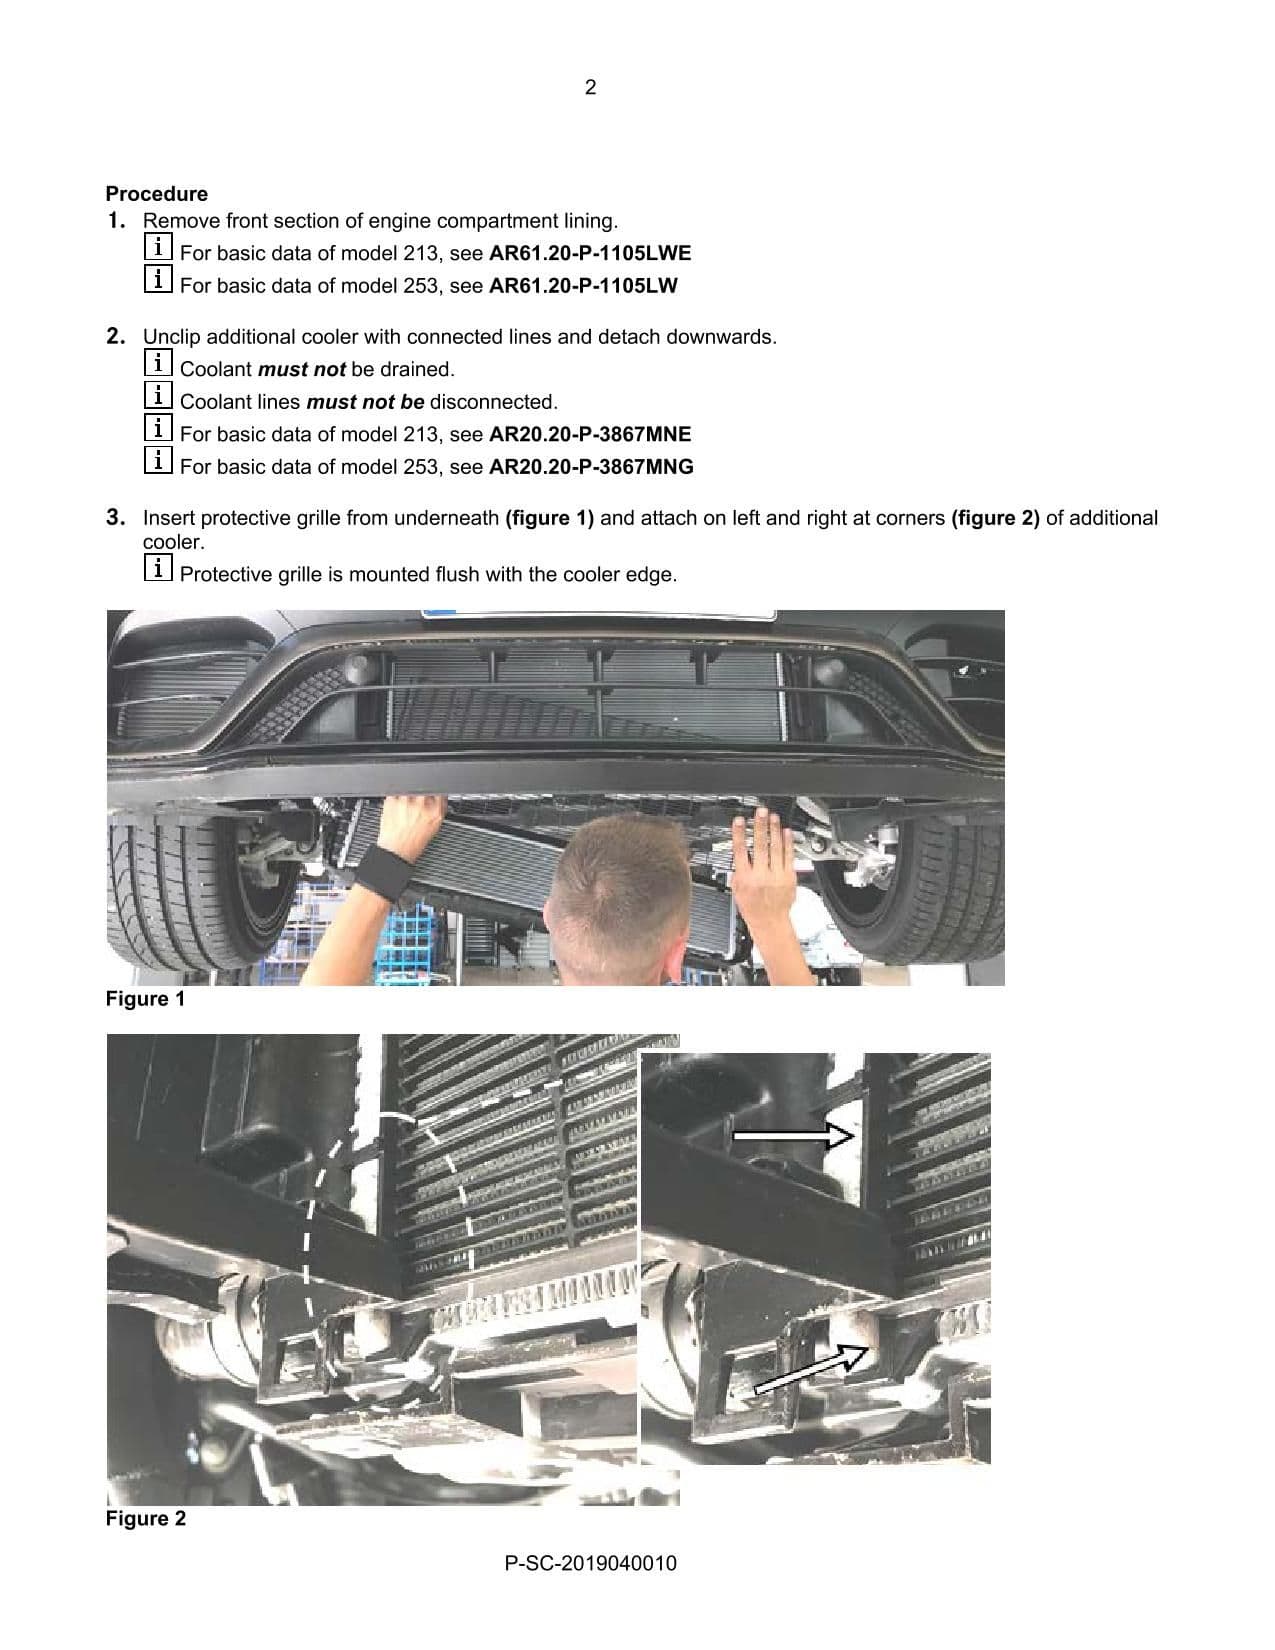 What kind of additive do I put it in top mounter intercooler coolant  reservoir? - BMW M3 and BMW M4 Forum